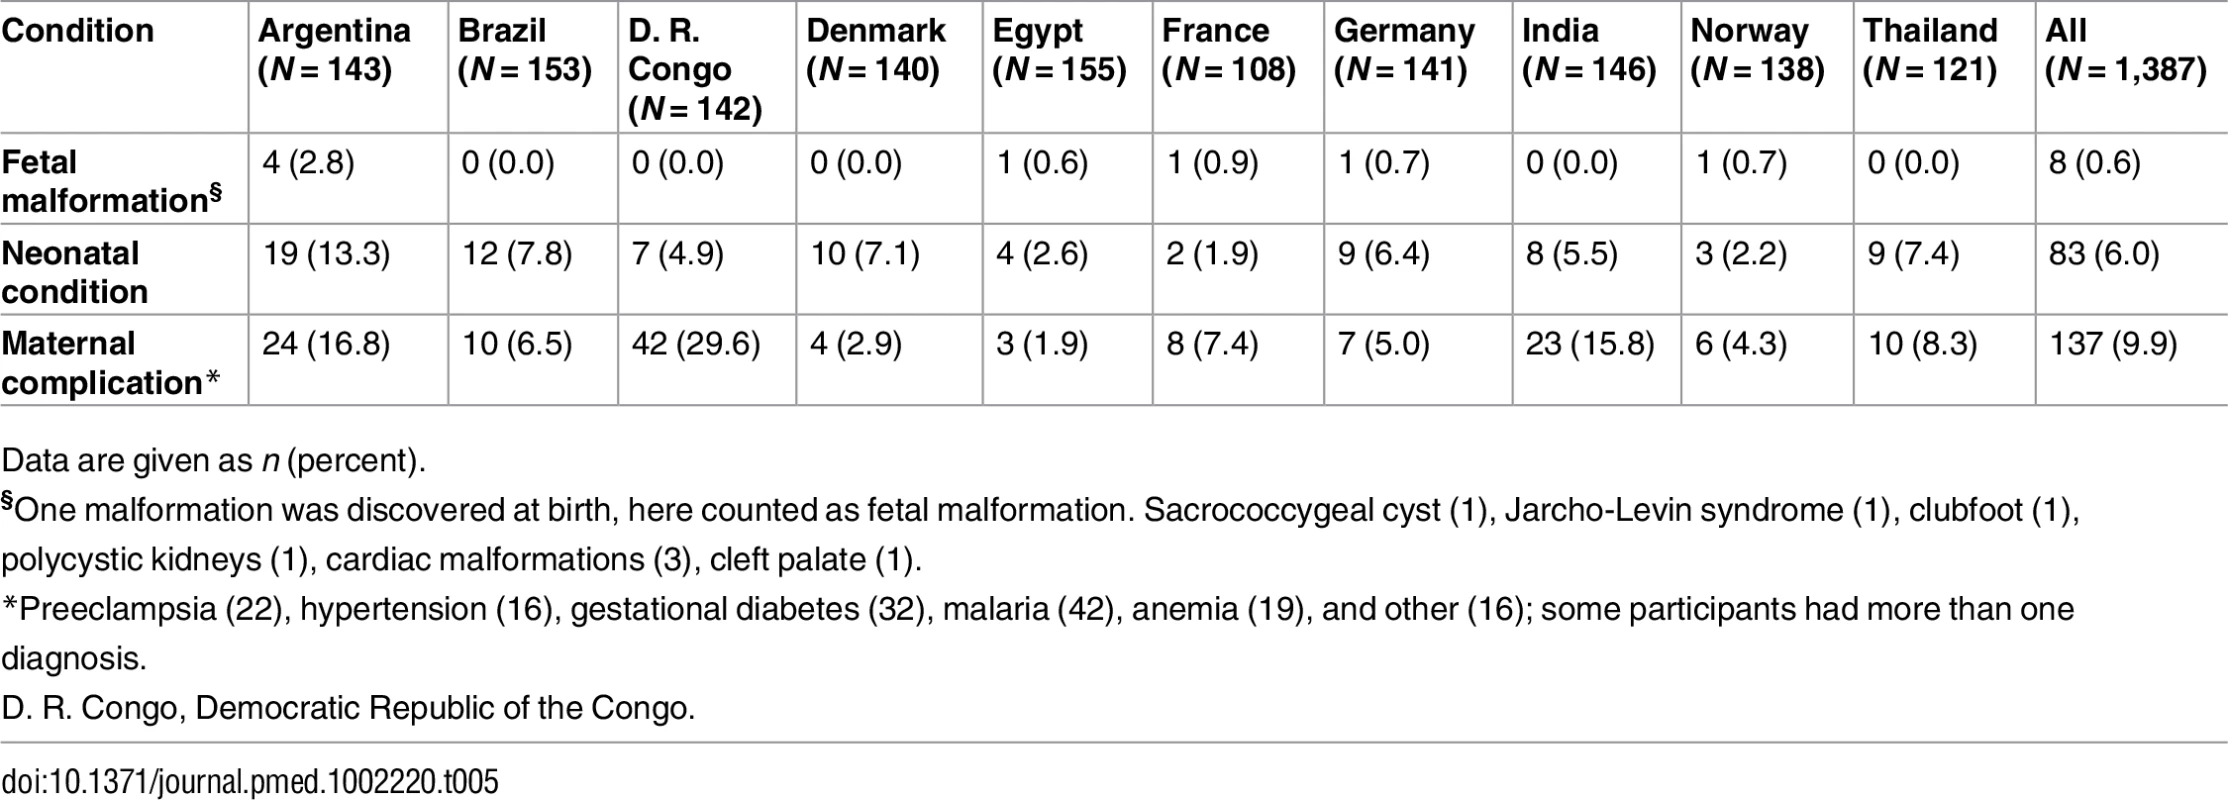 Maternal complications, fetal malformations, and neonatal conditions by country.